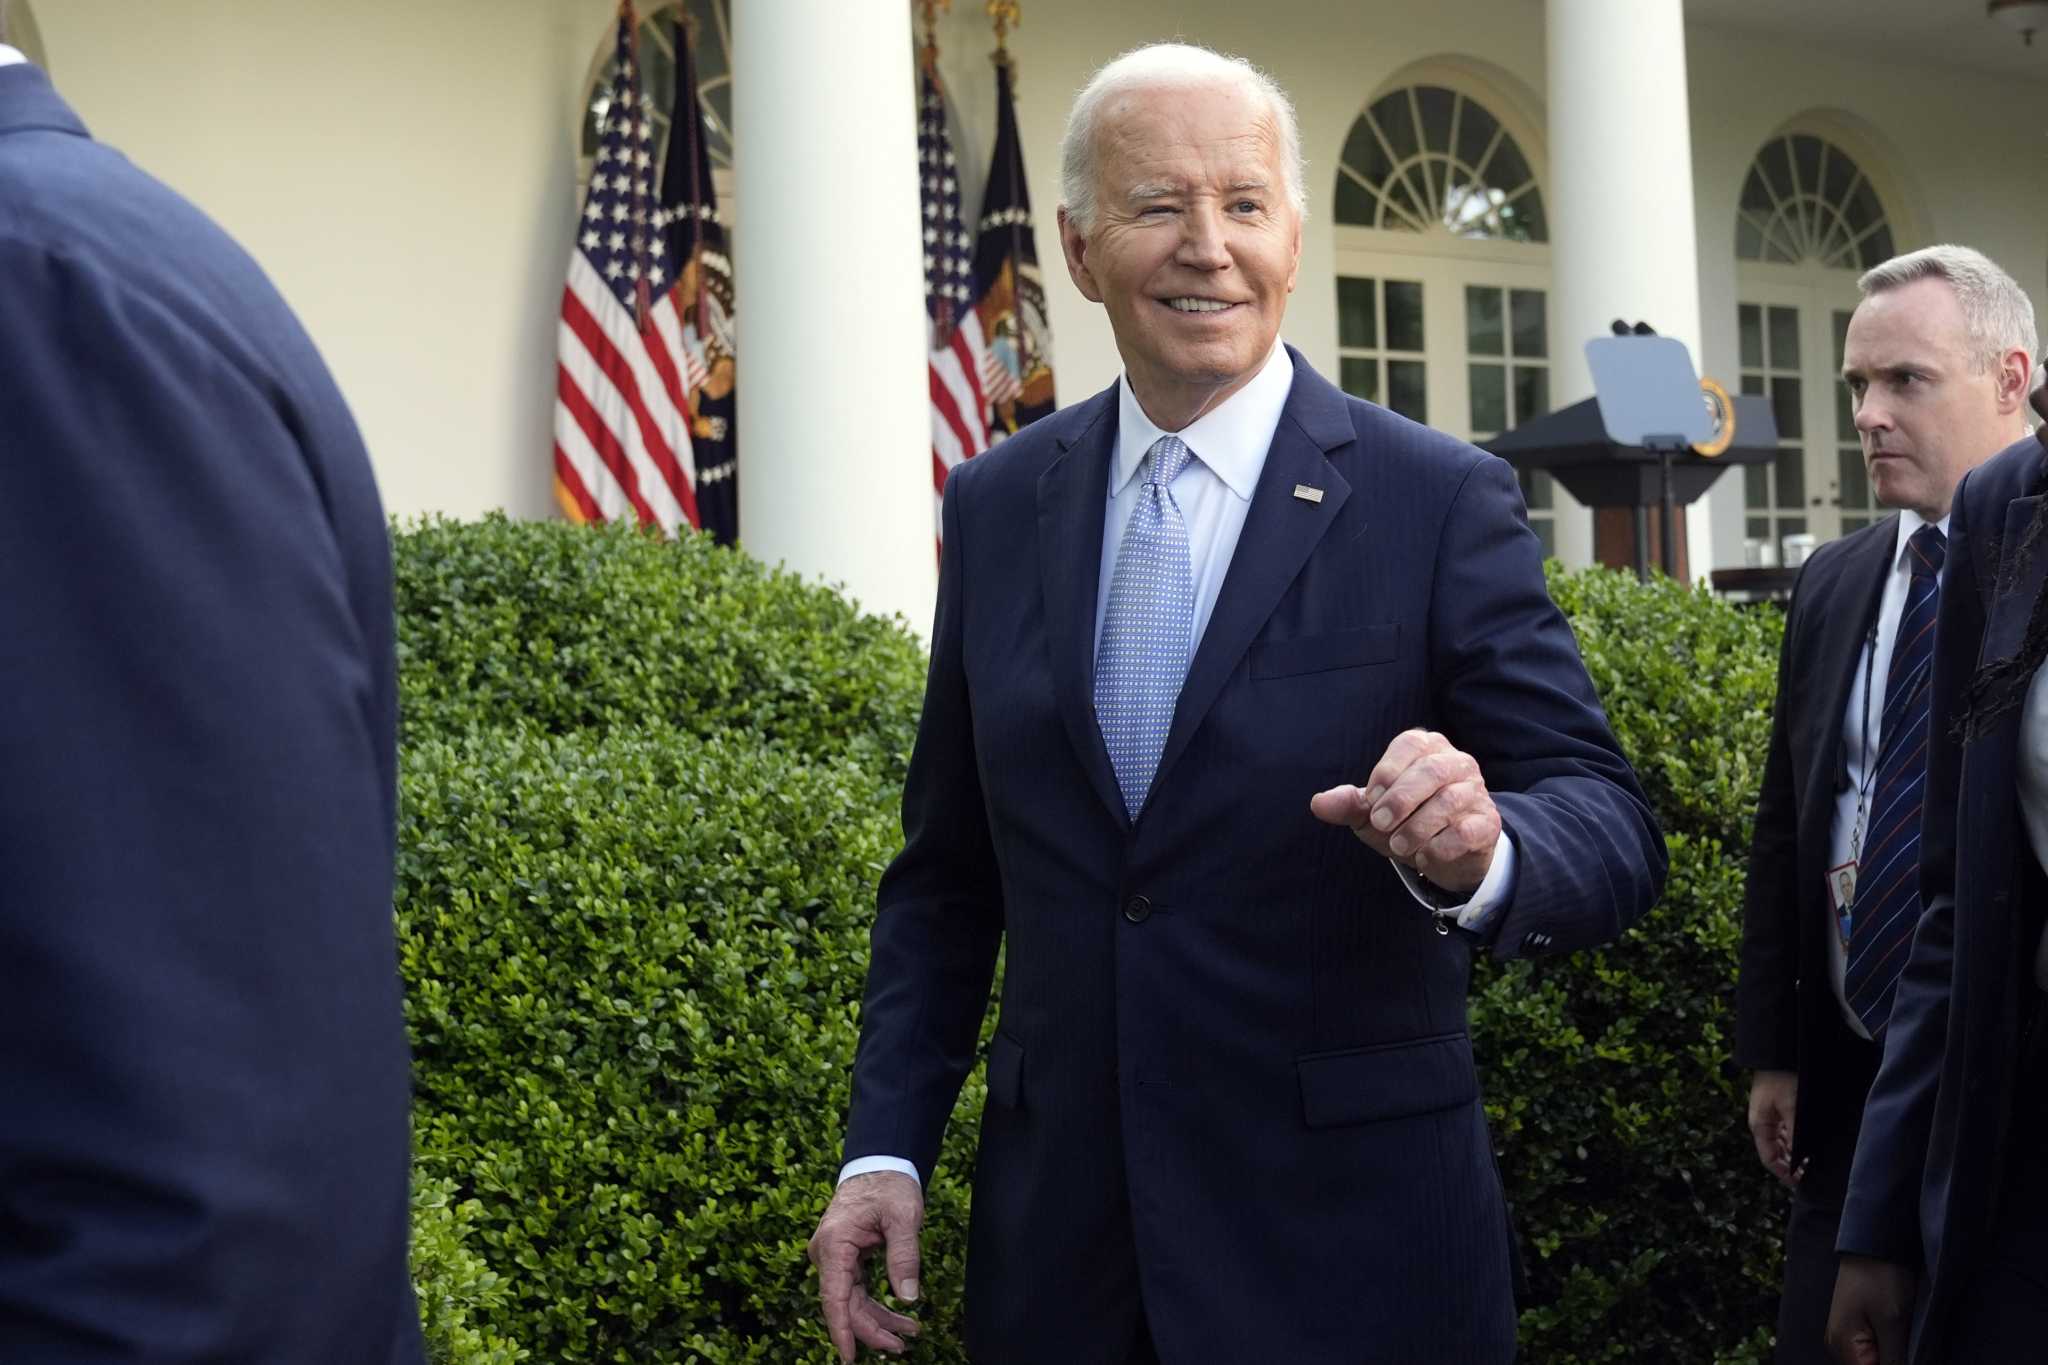 Biden and Democrats raised $51 million in April, far less than Trump and the GOP's $76 million